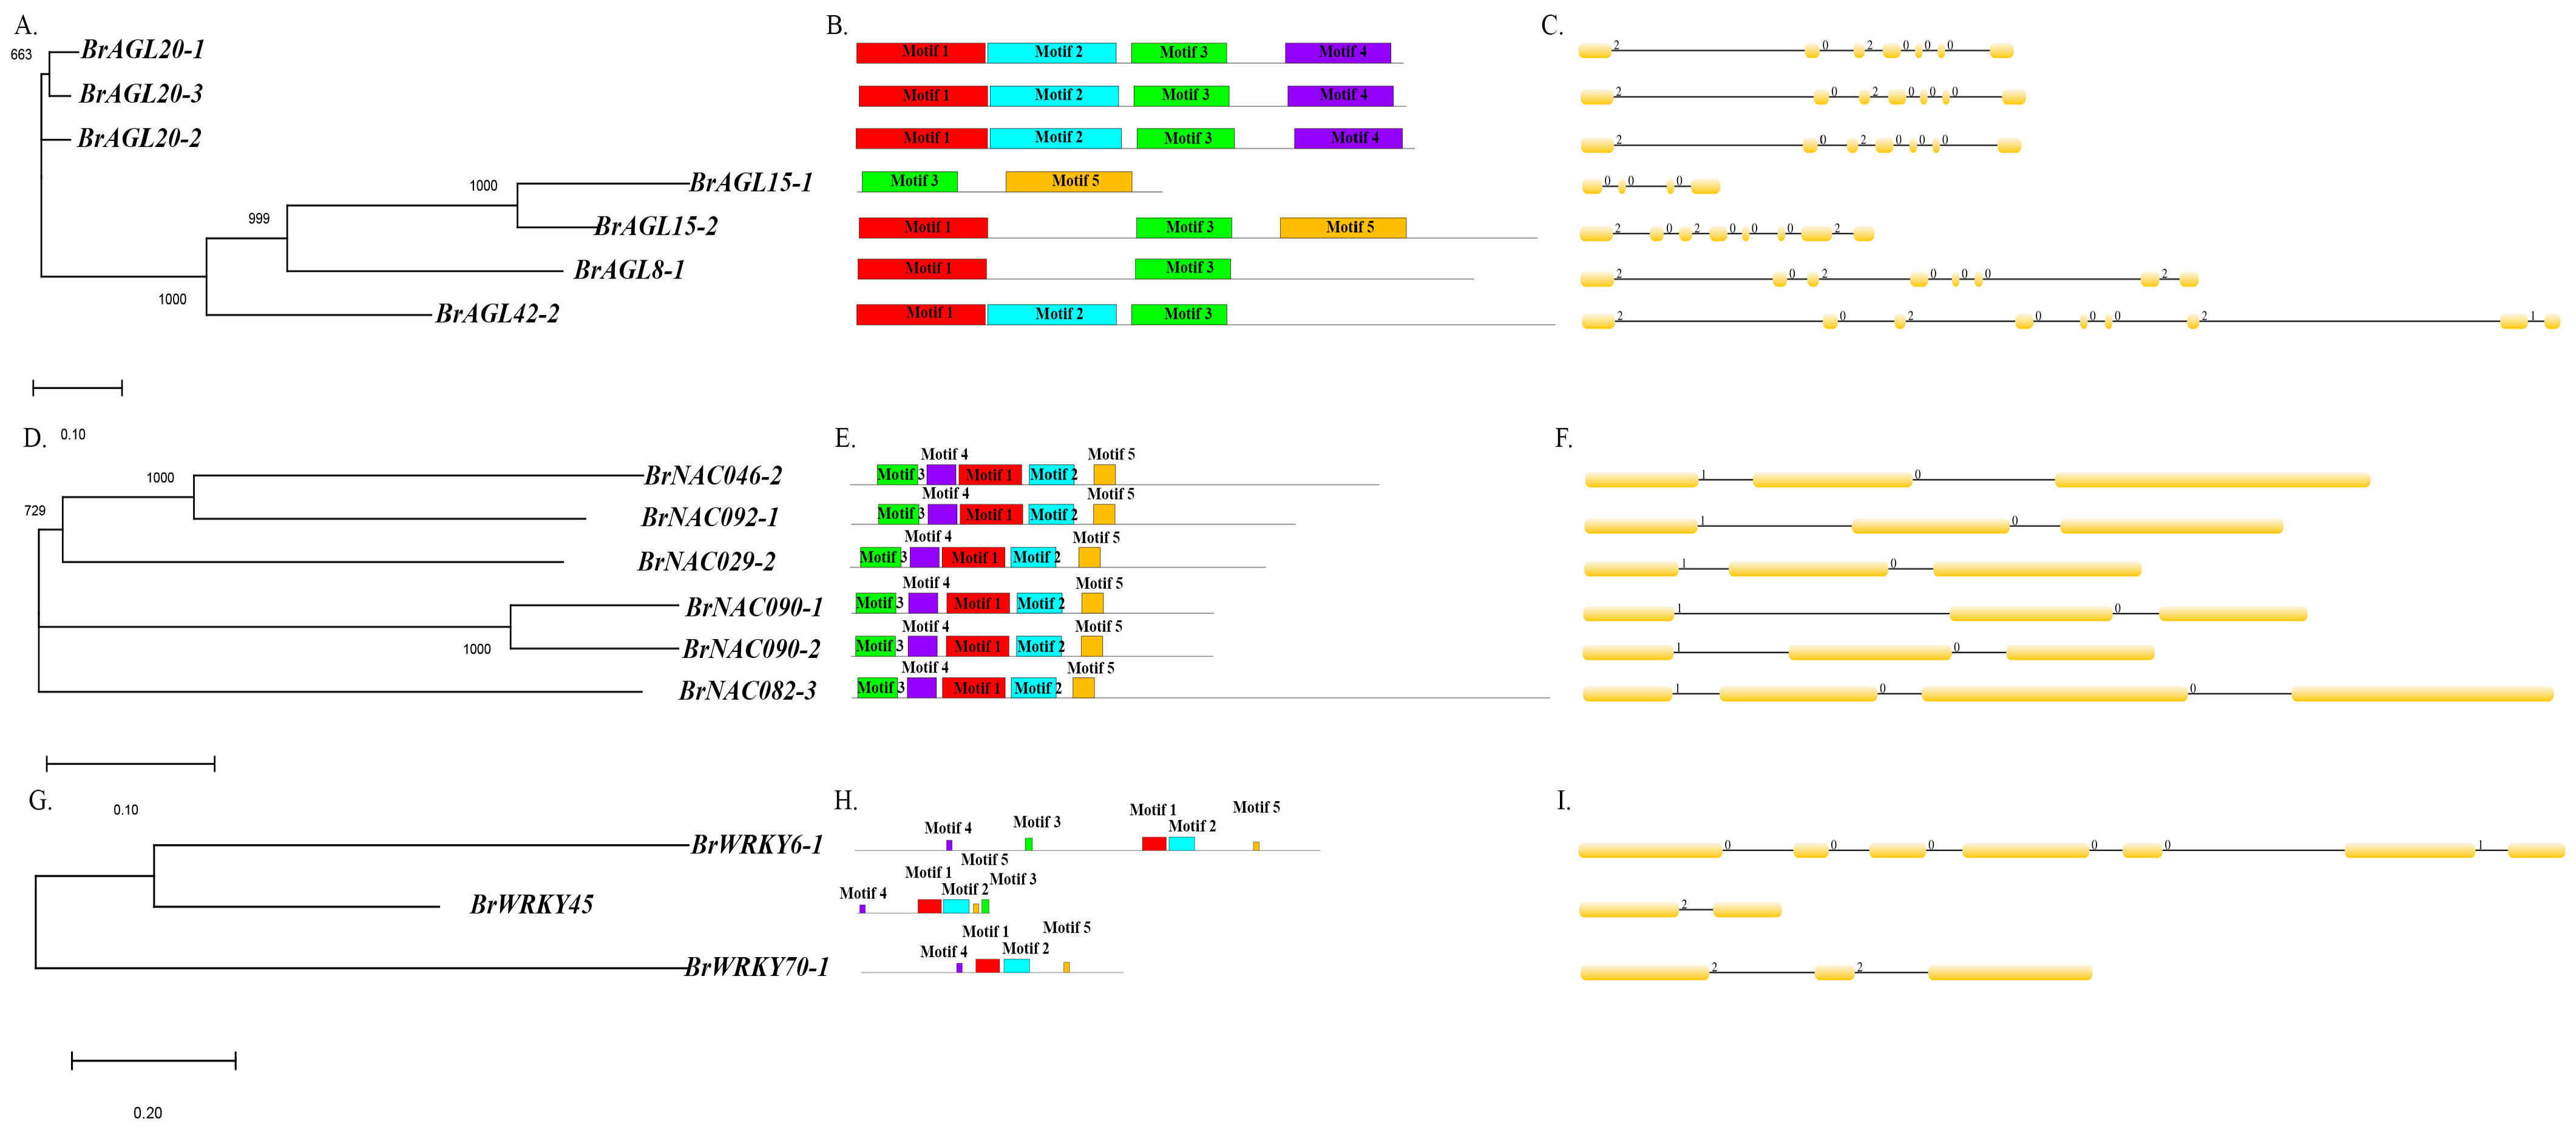 Ijms Free Full Text Comparative Transcriptome Based Mining Of Senescence Related Mads Nac And Wrky Transcription Factors In The Rapid Senescence Line Dls 91 Of Brassica Rapa Html